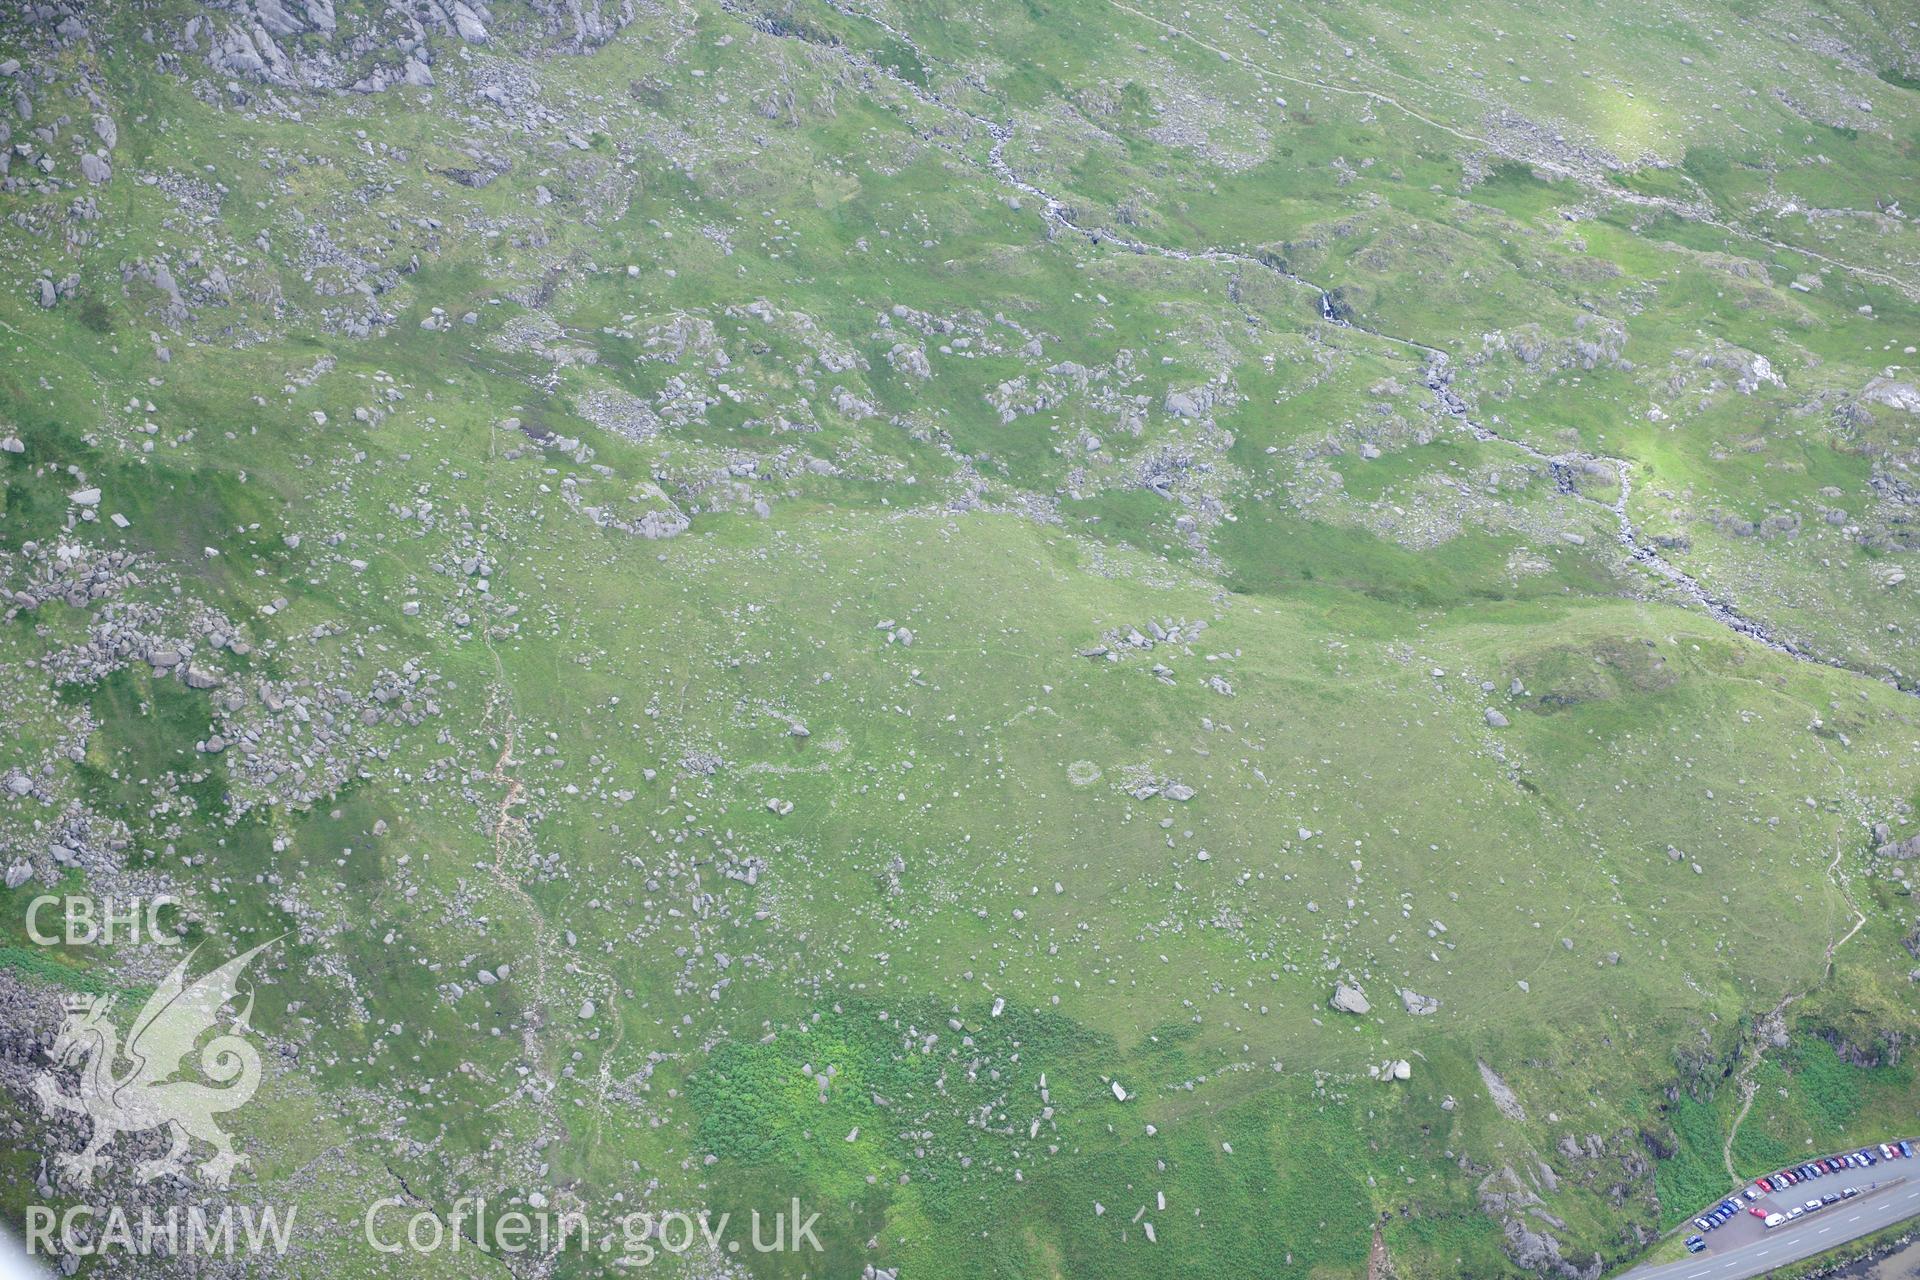 RCAHMW colour oblique photograph of hut circles, Nant Bochlwyd. Taken by Toby Driver on 10/08/2012.